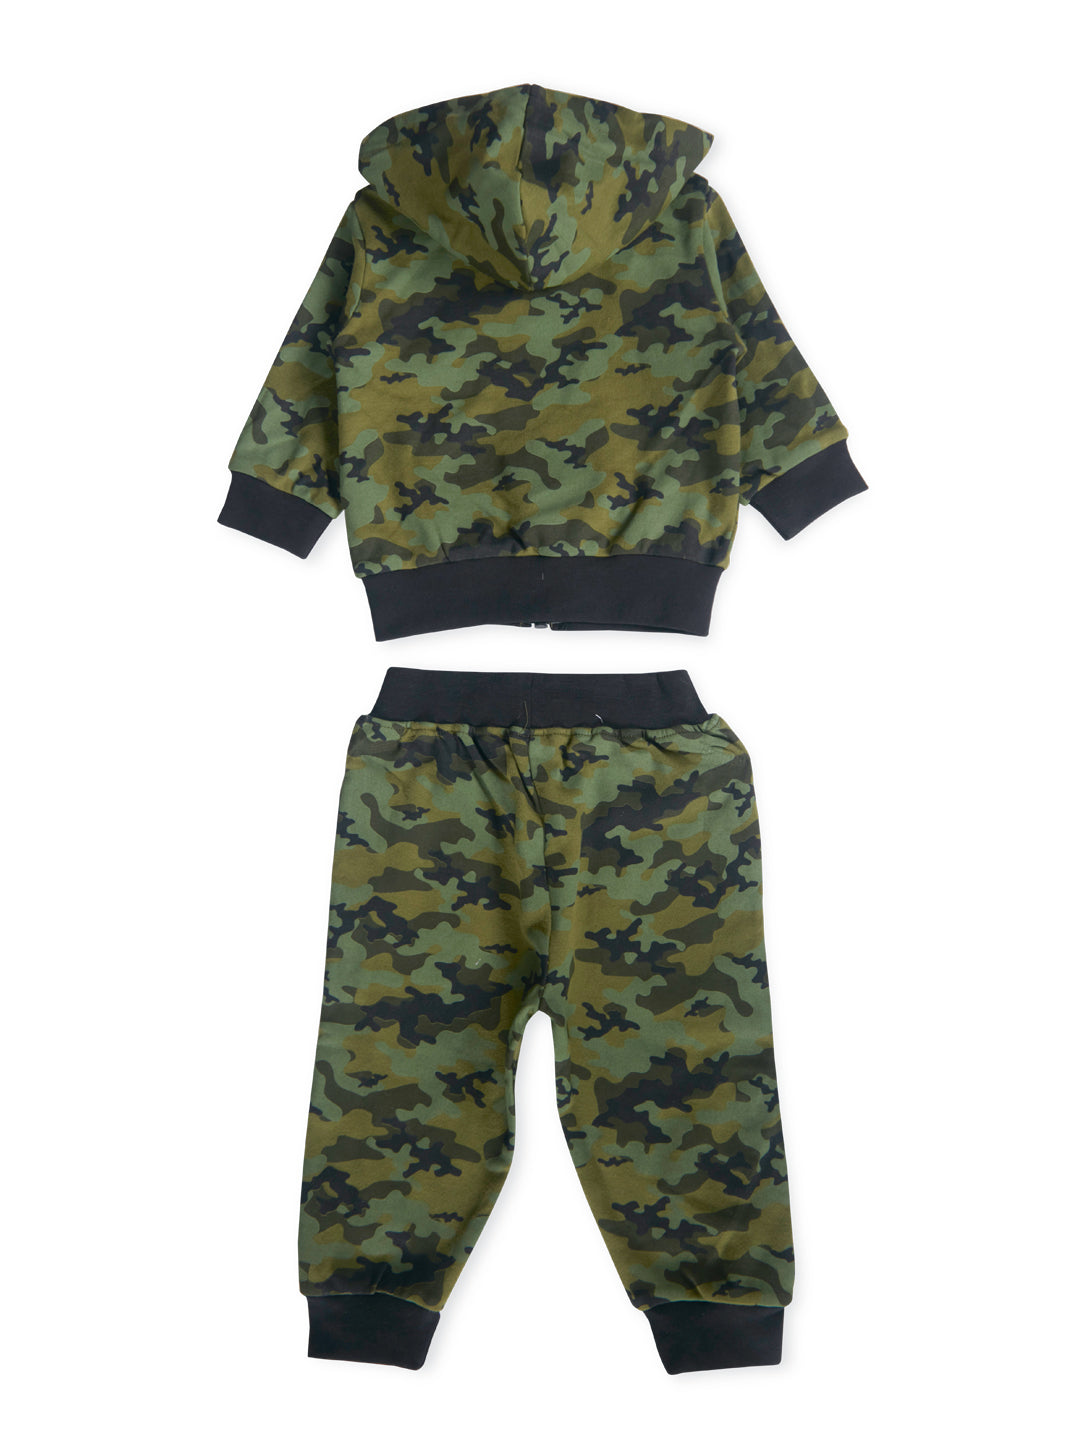 Baby Boys Set of Green jacket and pajama pants with white tee